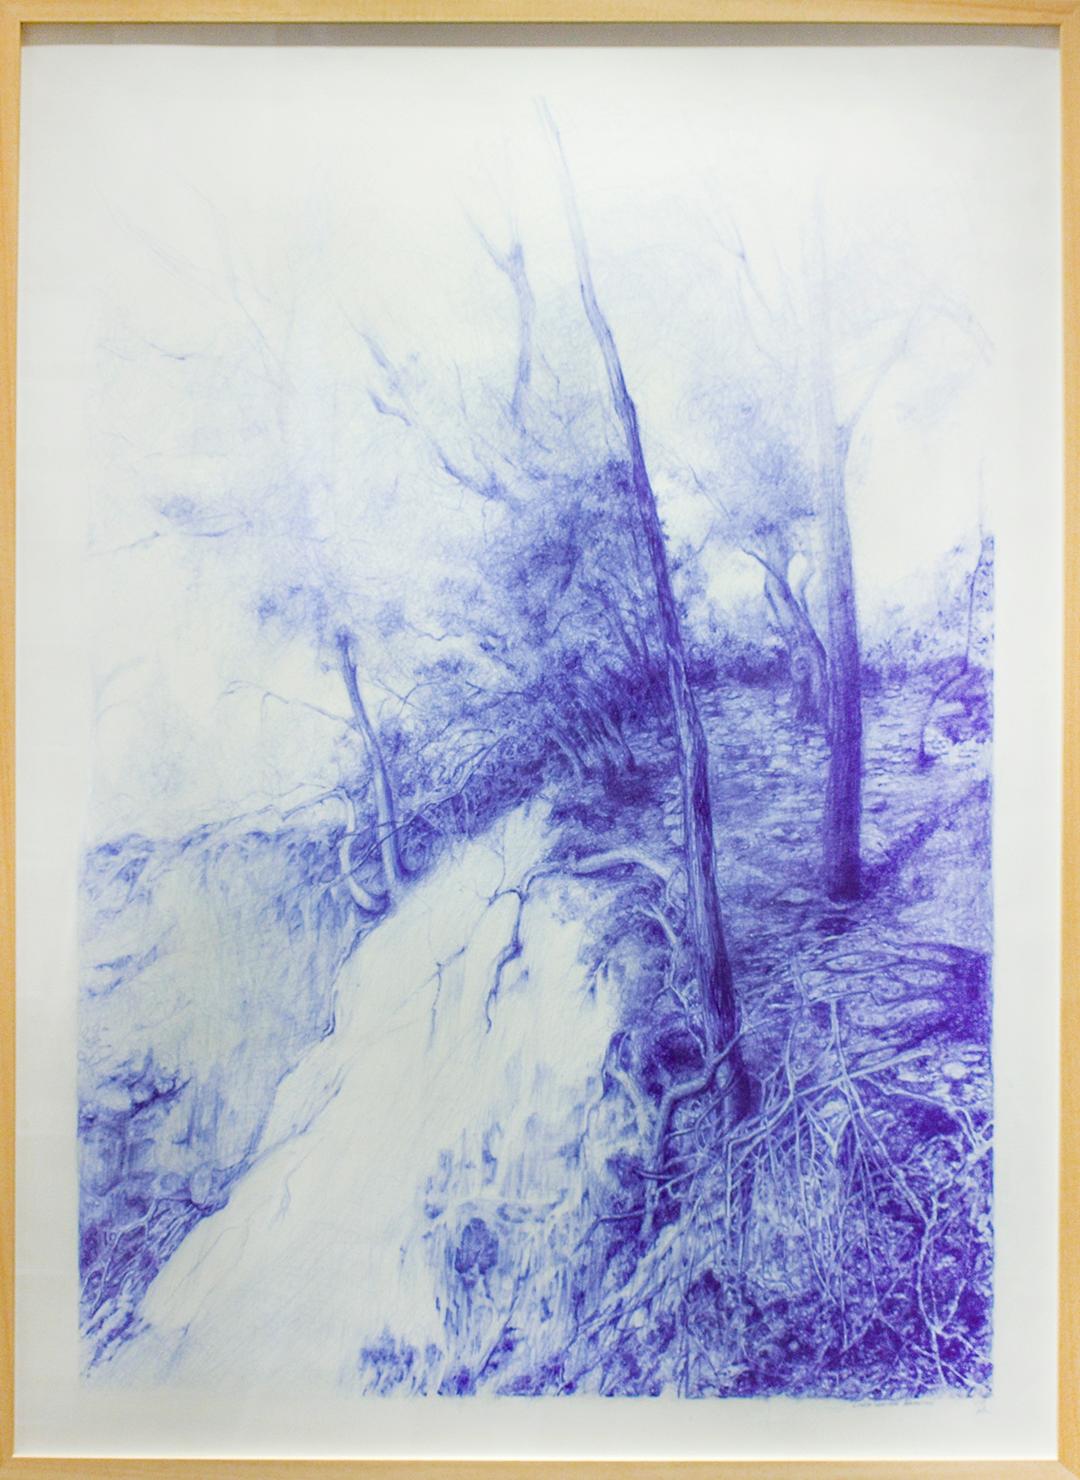 Linda Newman Boughton Landscape Art - The Seen (Realistic Landscape Blue Ballpoint Pen Drawing of Forest & Waterfall)